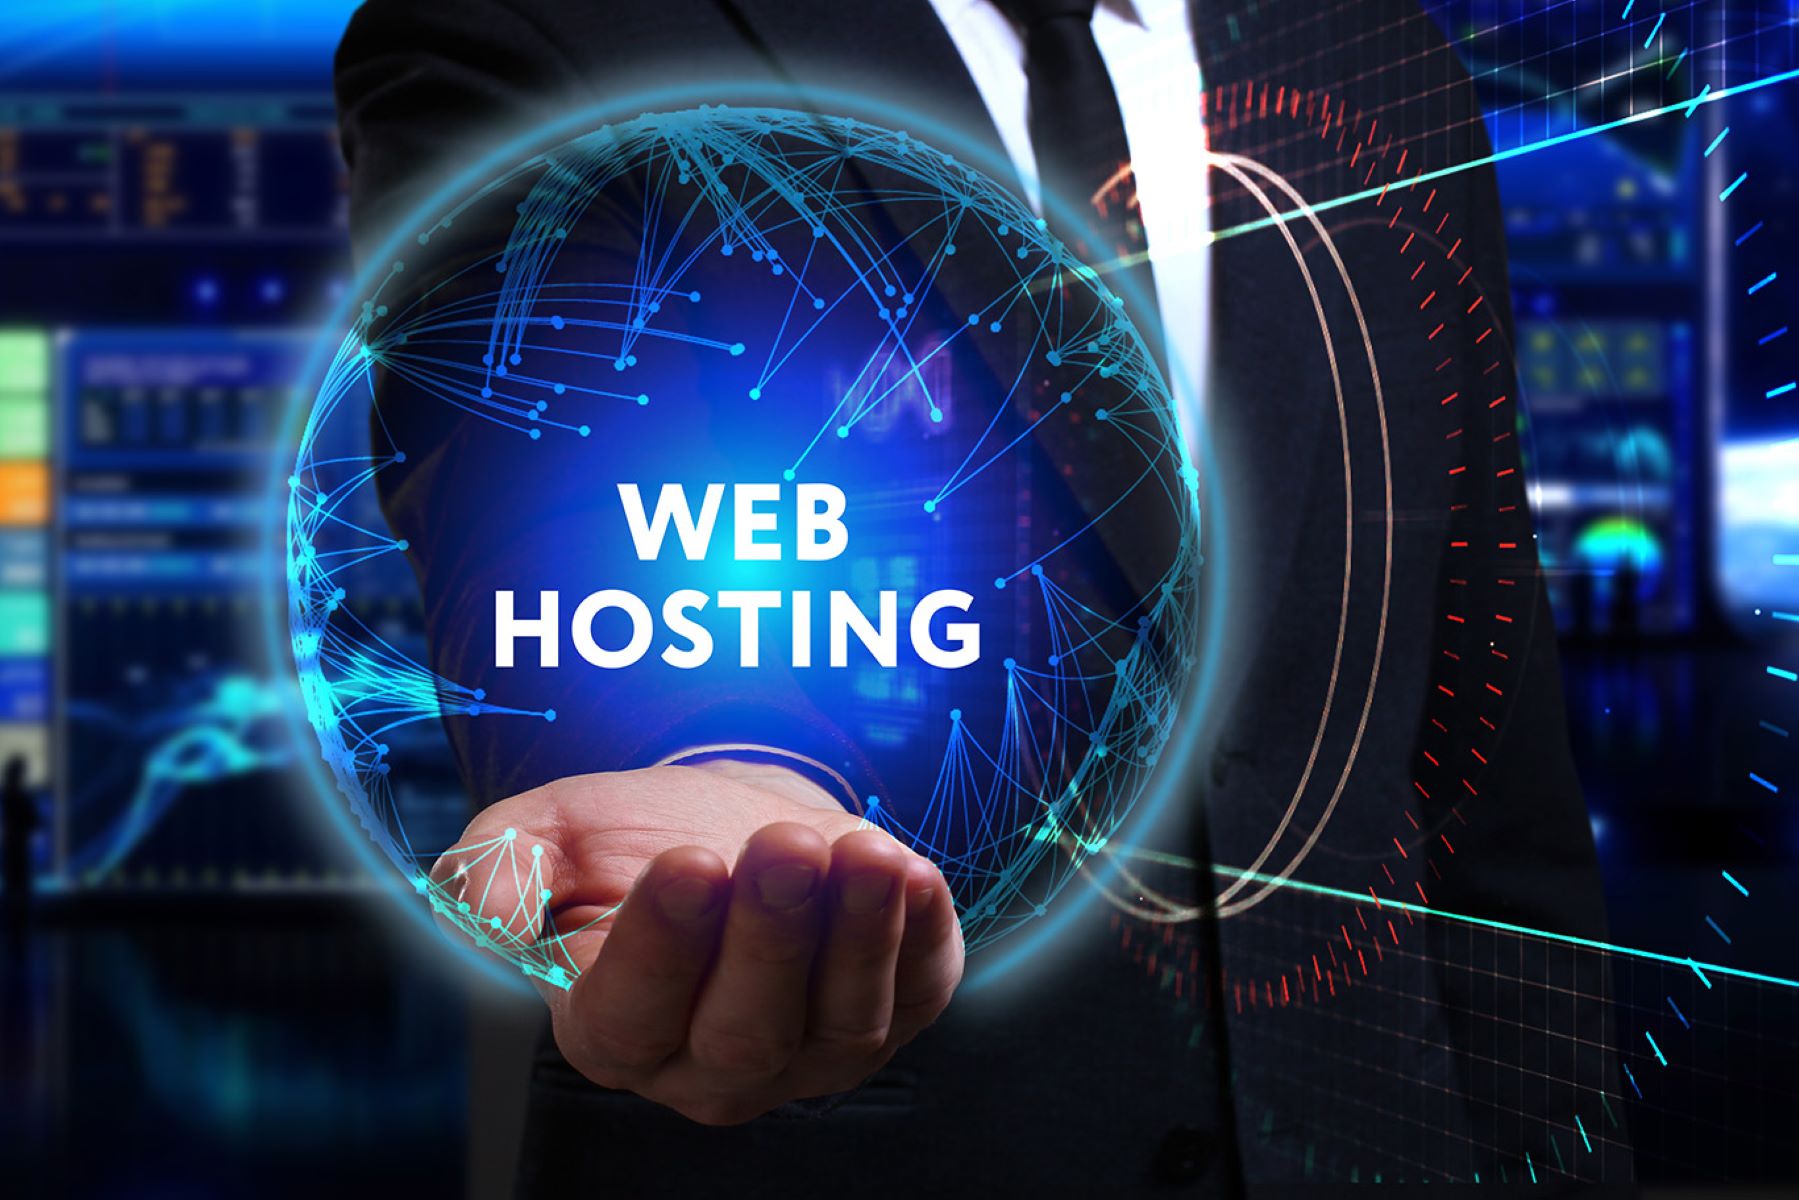 How To Find Web Hosting Provider